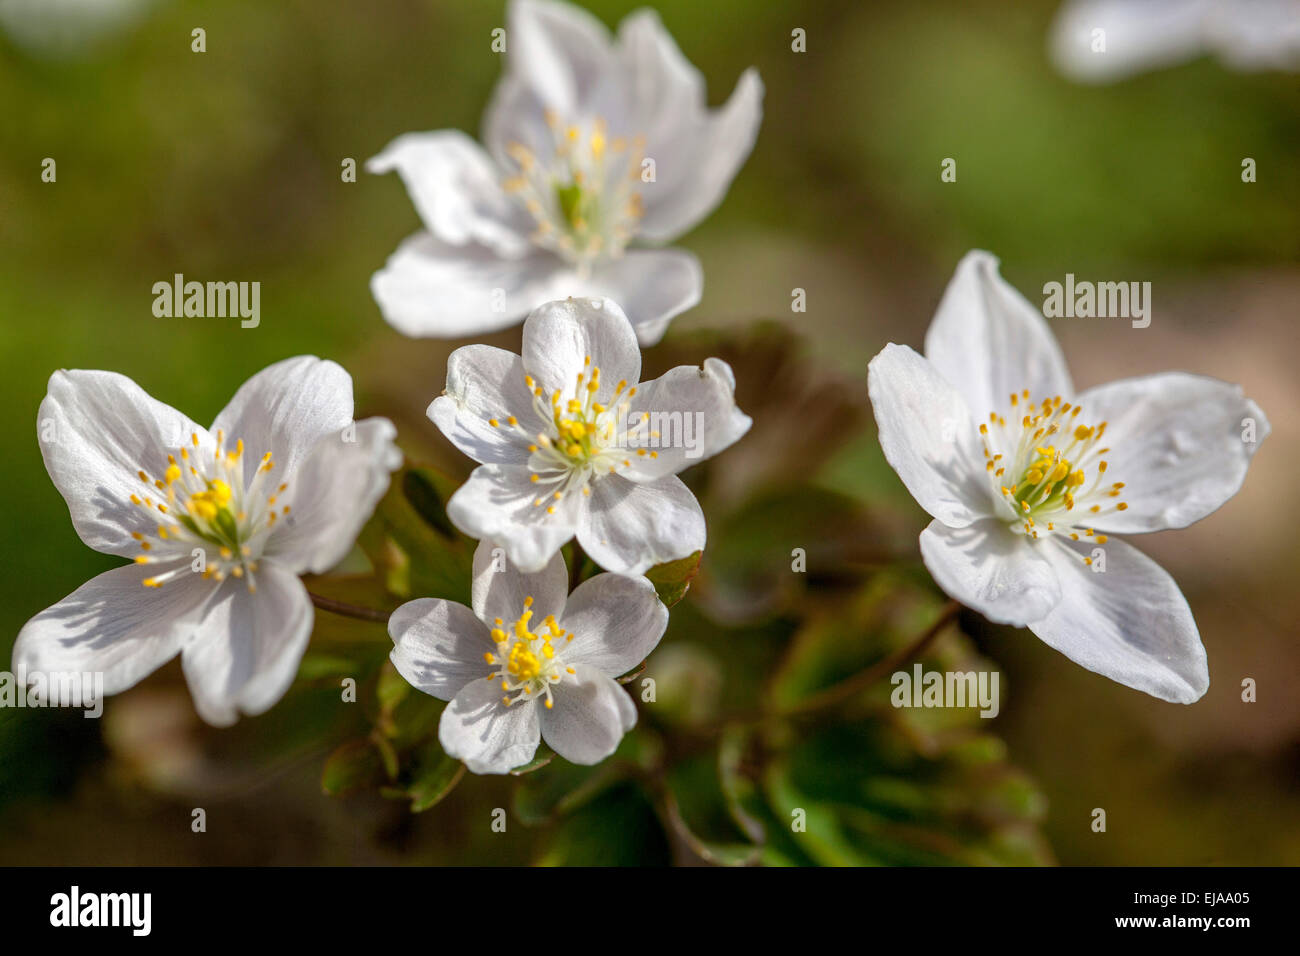 Falso rue anemone Isopyrum thalictroides Foto Stock